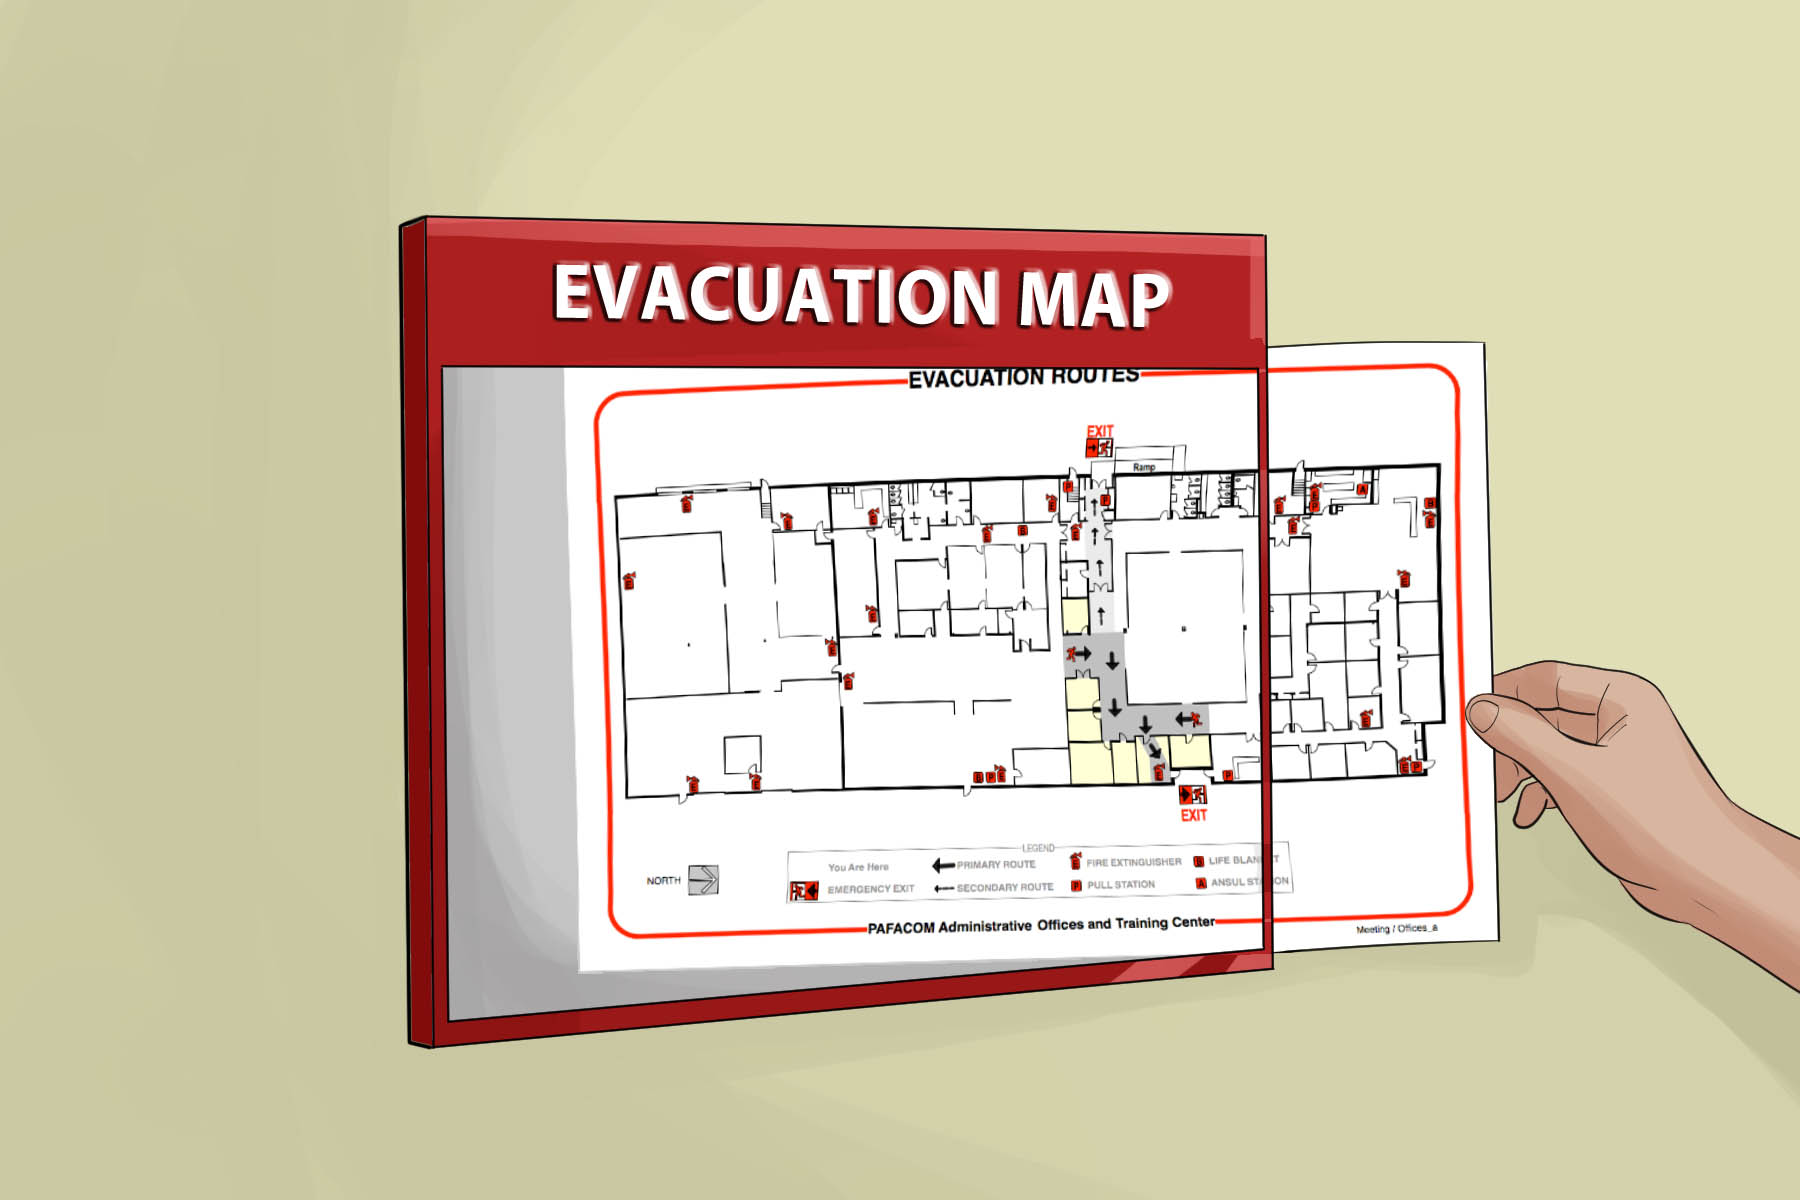 How to Evacuate a Building in an Emergency: 11 Steps